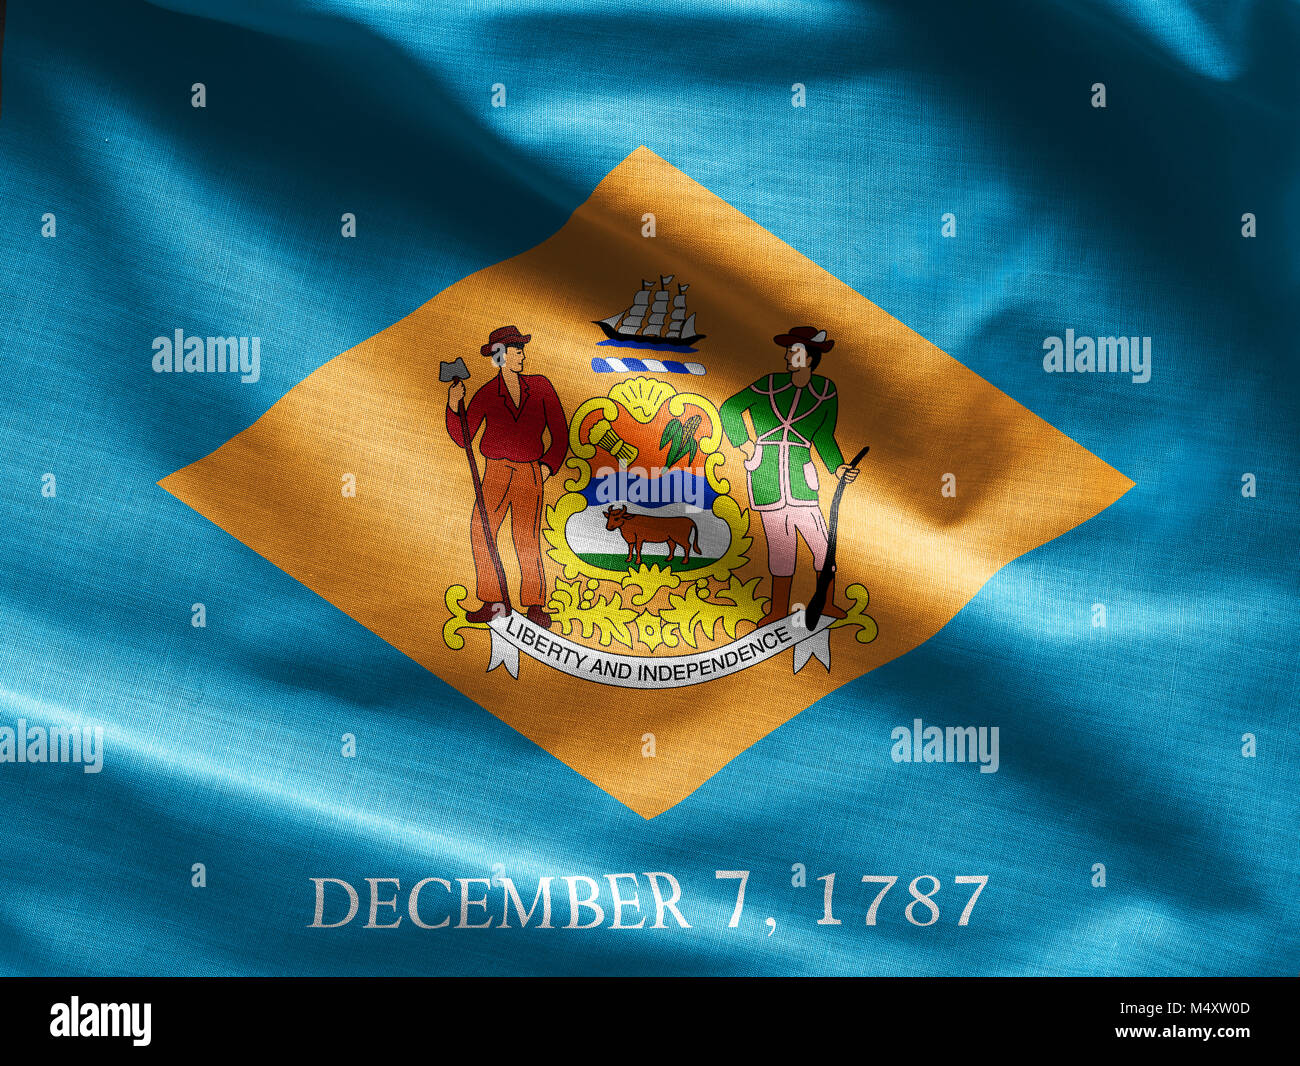 Fabric texture of the Delaware Flag - Flags from the USA Stock Photo